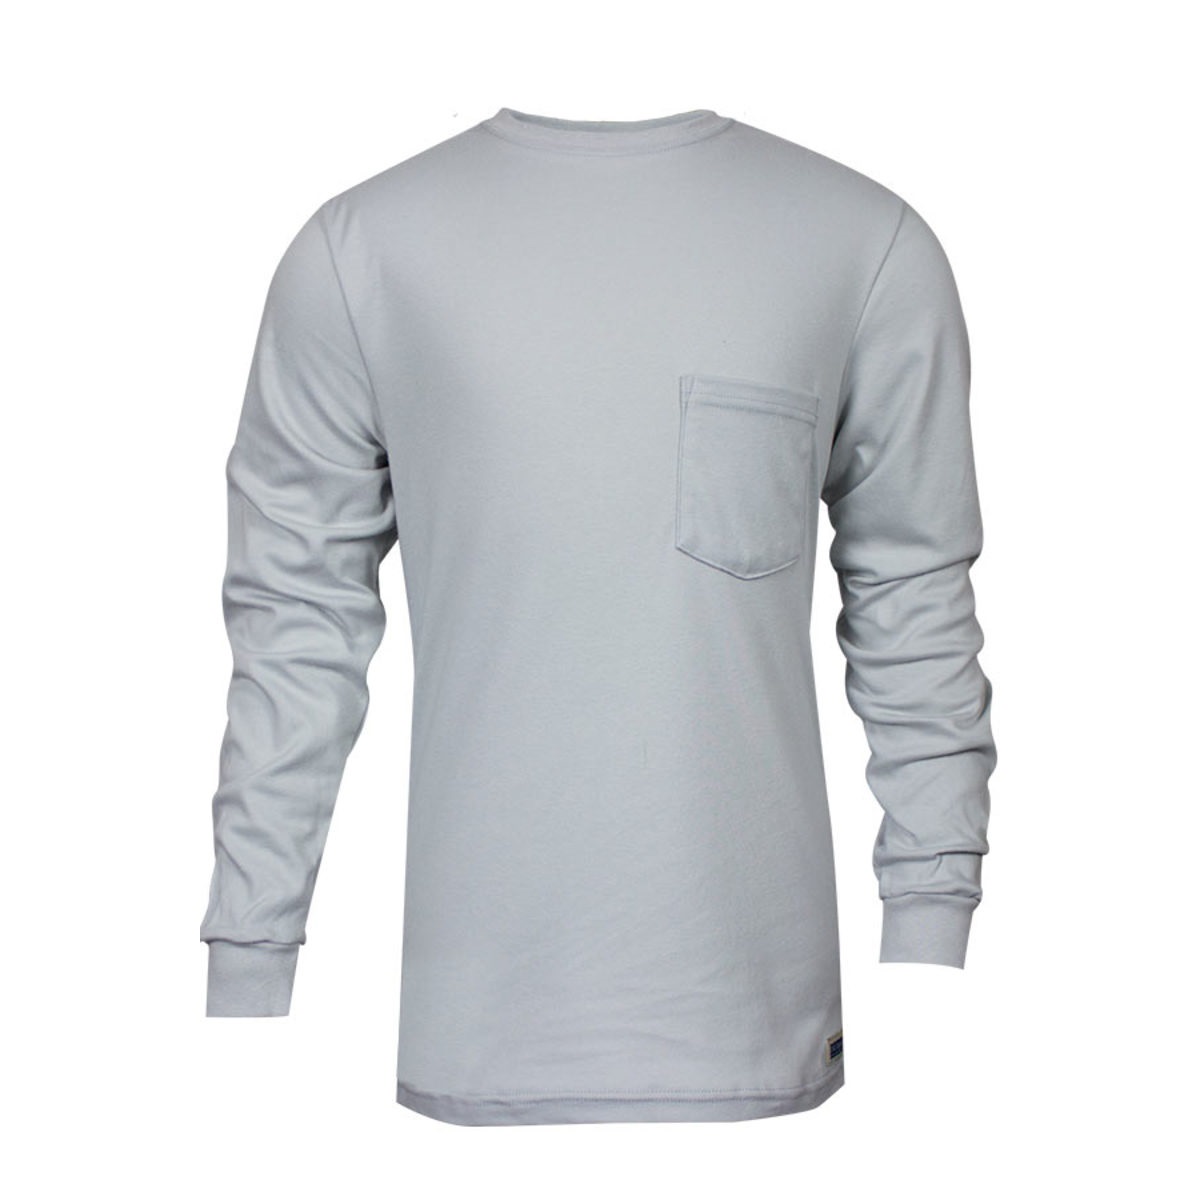 FR Classic Cotton Long Sleeve T-Shirt 100 Percent FR Cotton in Gray